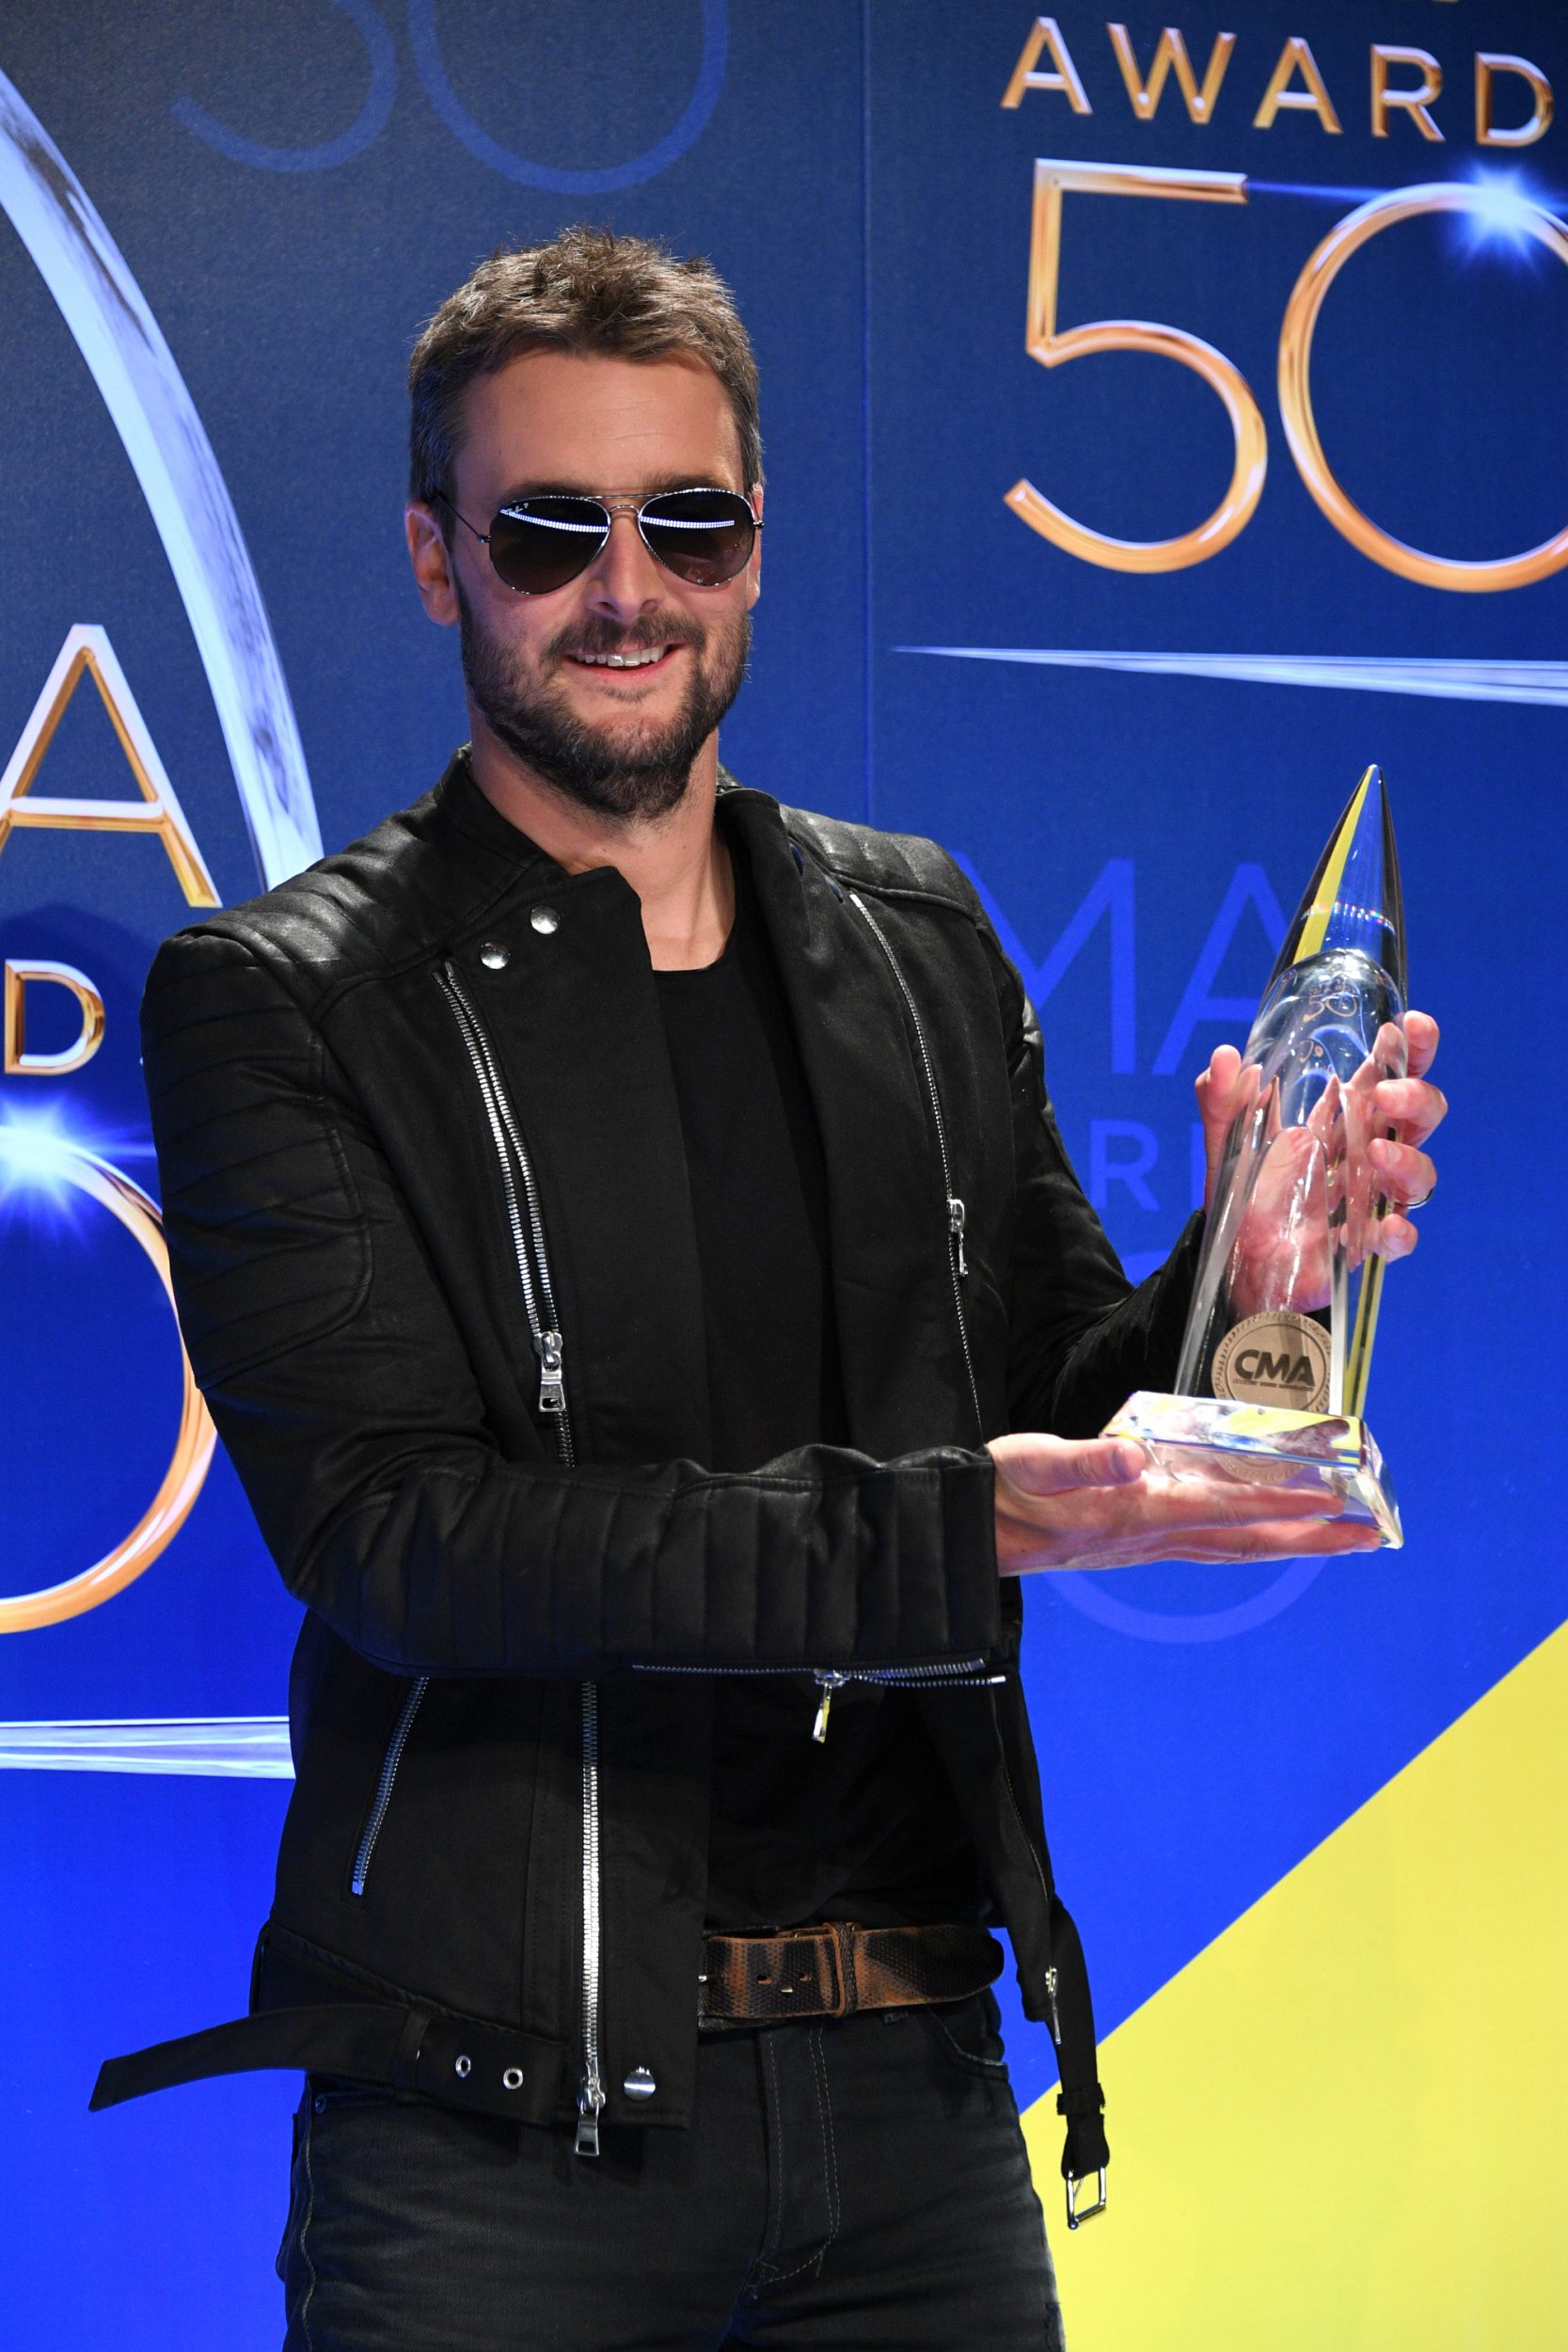 THE 50th ANNUAL CMA AWARDS - “The 50th Annual CMA Awards,” hosted by Brad Paisley and Carrie Underwood, broadcasts live from the Bridgestone Arena in Nashville, Wednesday, November 2 (8:00-11:00 p.m. EDT), on the ABC Television Network. (ABC/Brett Oronzio) ERIC CHURCH